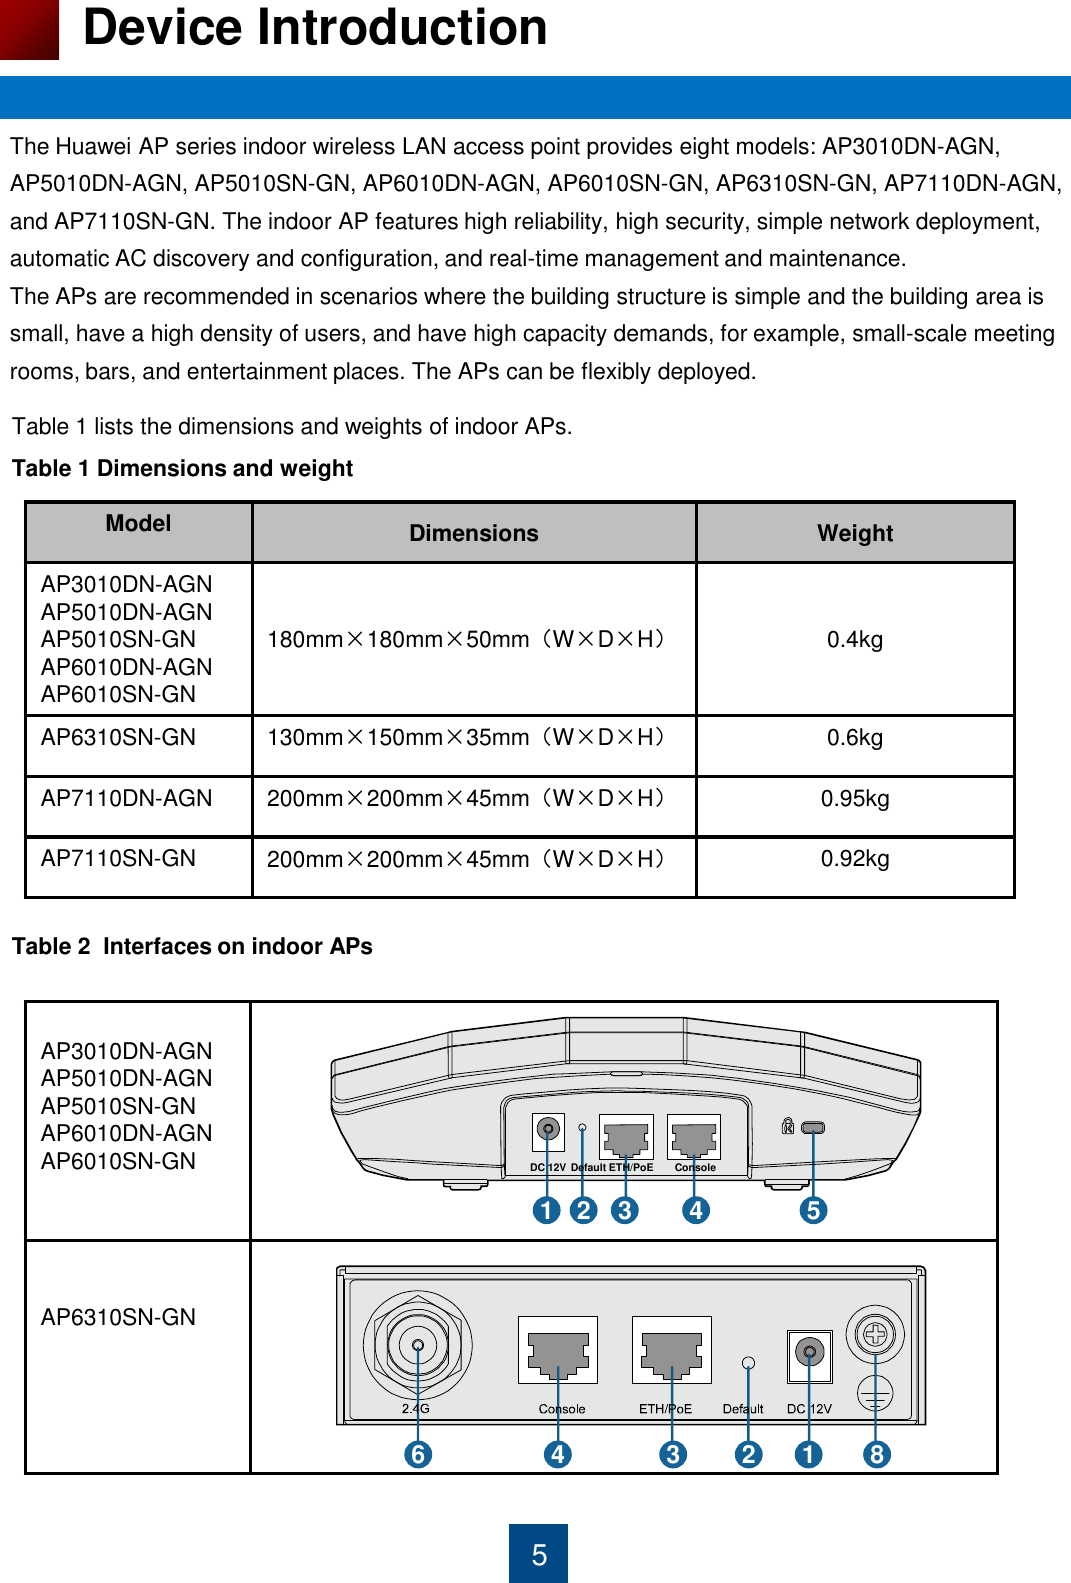 5 Device Introduction The Huawei AP series indoor wireless LAN access point provides eight models: AP3010DN-AGN, AP5010DN-AGN, AP5010SN-GN, AP6010DN-AGN, AP6010SN-GN, AP6310SN-GN, AP7110DN-AGN, and AP7110SN-GN. The indoor AP features high reliability, high security, simple network deployment, automatic AC discovery and configuration, and real-time management and maintenance. The APs are recommended in scenarios where the building structure is simple and the building area is small, have a high density of users, and have high capacity demands, for example, small-scale meeting rooms, bars, and entertainment places. The APs can be flexibly deployed.  Table 1 lists the dimensions and weights of indoor APs.  Table 1 Dimensions and weight   Model Dimensions Weight AP3010DN-AGN AP5010DN-AGN AP5010SN-GN AP6010DN-AGN AP6010SN-GN   180mm×180mm×50mm（W×D×H）   0.4kg AP6310SN-GN 130mm×150mm×35mm（W×D×H） 0.6kg AP7110DN-AGN 200mm×200mm×45mm（W×D×H） 0.95kg AP7110SN-GN 200mm×200mm×45mm（W×D×H） 0.92kg Table 2  Interfaces on indoor APs    AP3010DN-AGN AP5010DN-AGN AP5010SN-GN AP6010DN-AGN AP6010SN-GN    AP6310SN-GN 1  2  3  4  5 DC 12V  Default  ETH/PoE  Console 1 2 3 4 6  8 